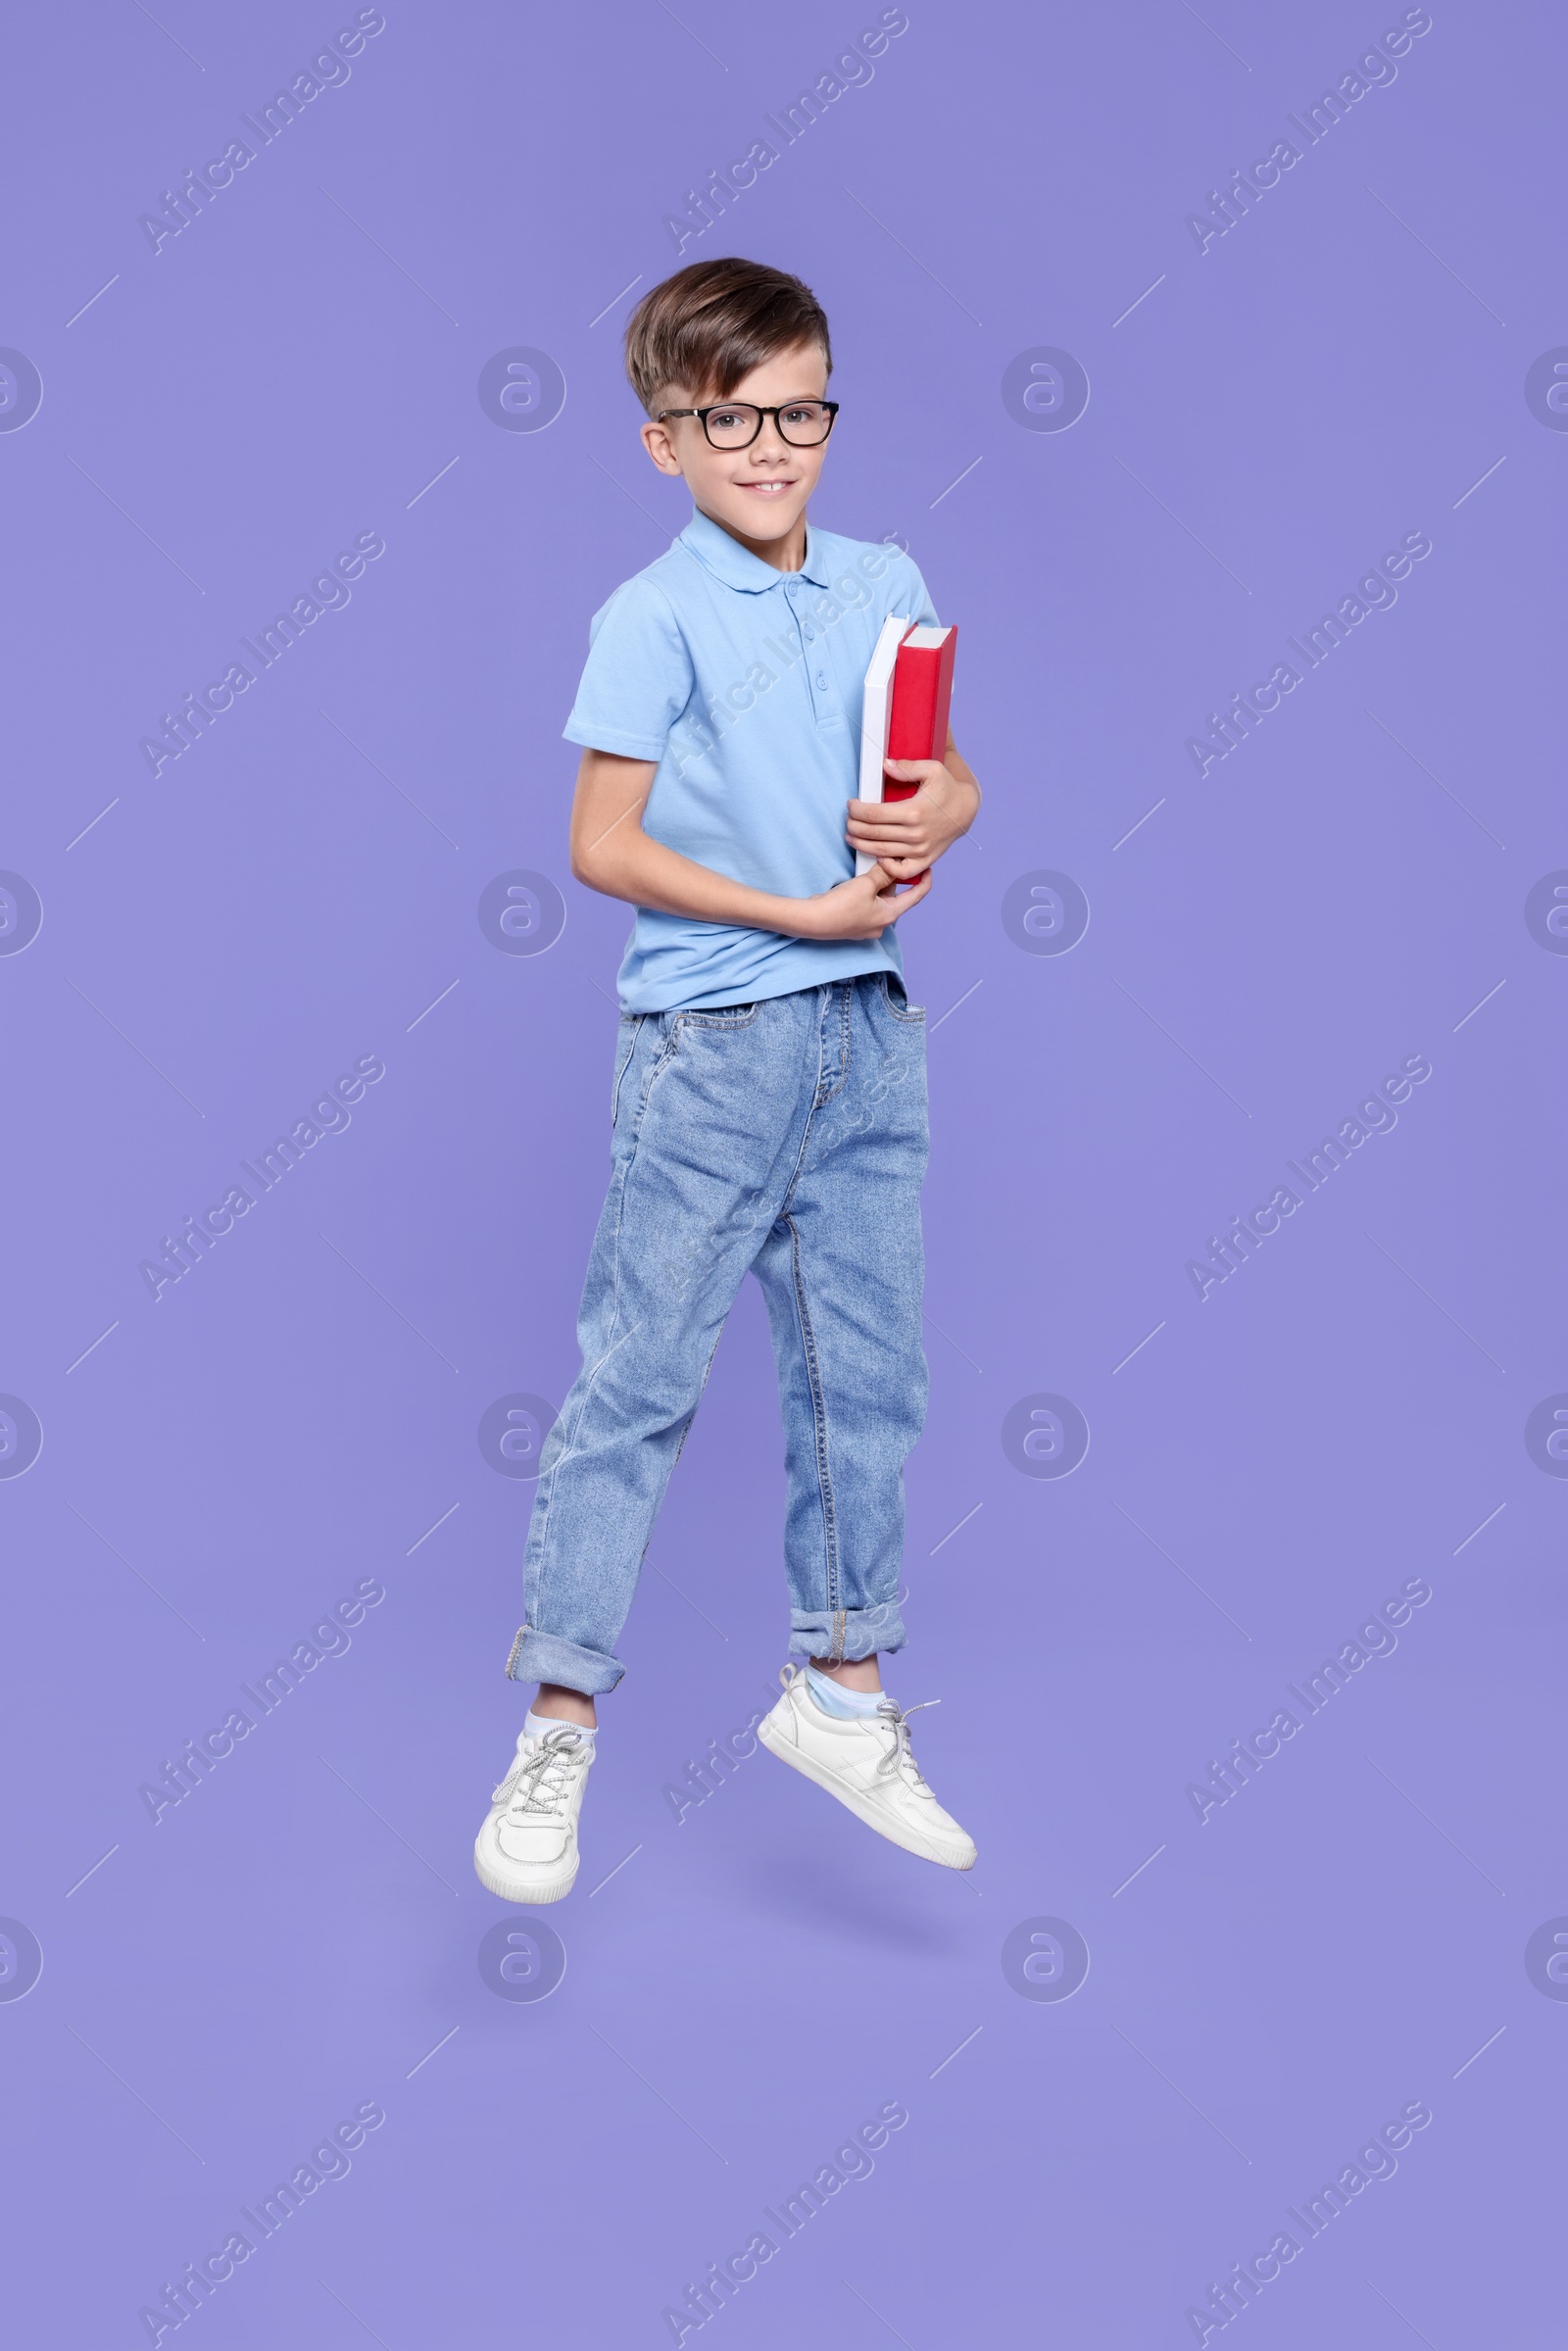 Photo of Cute schoolboy in glasses holding books and jumping on violet background